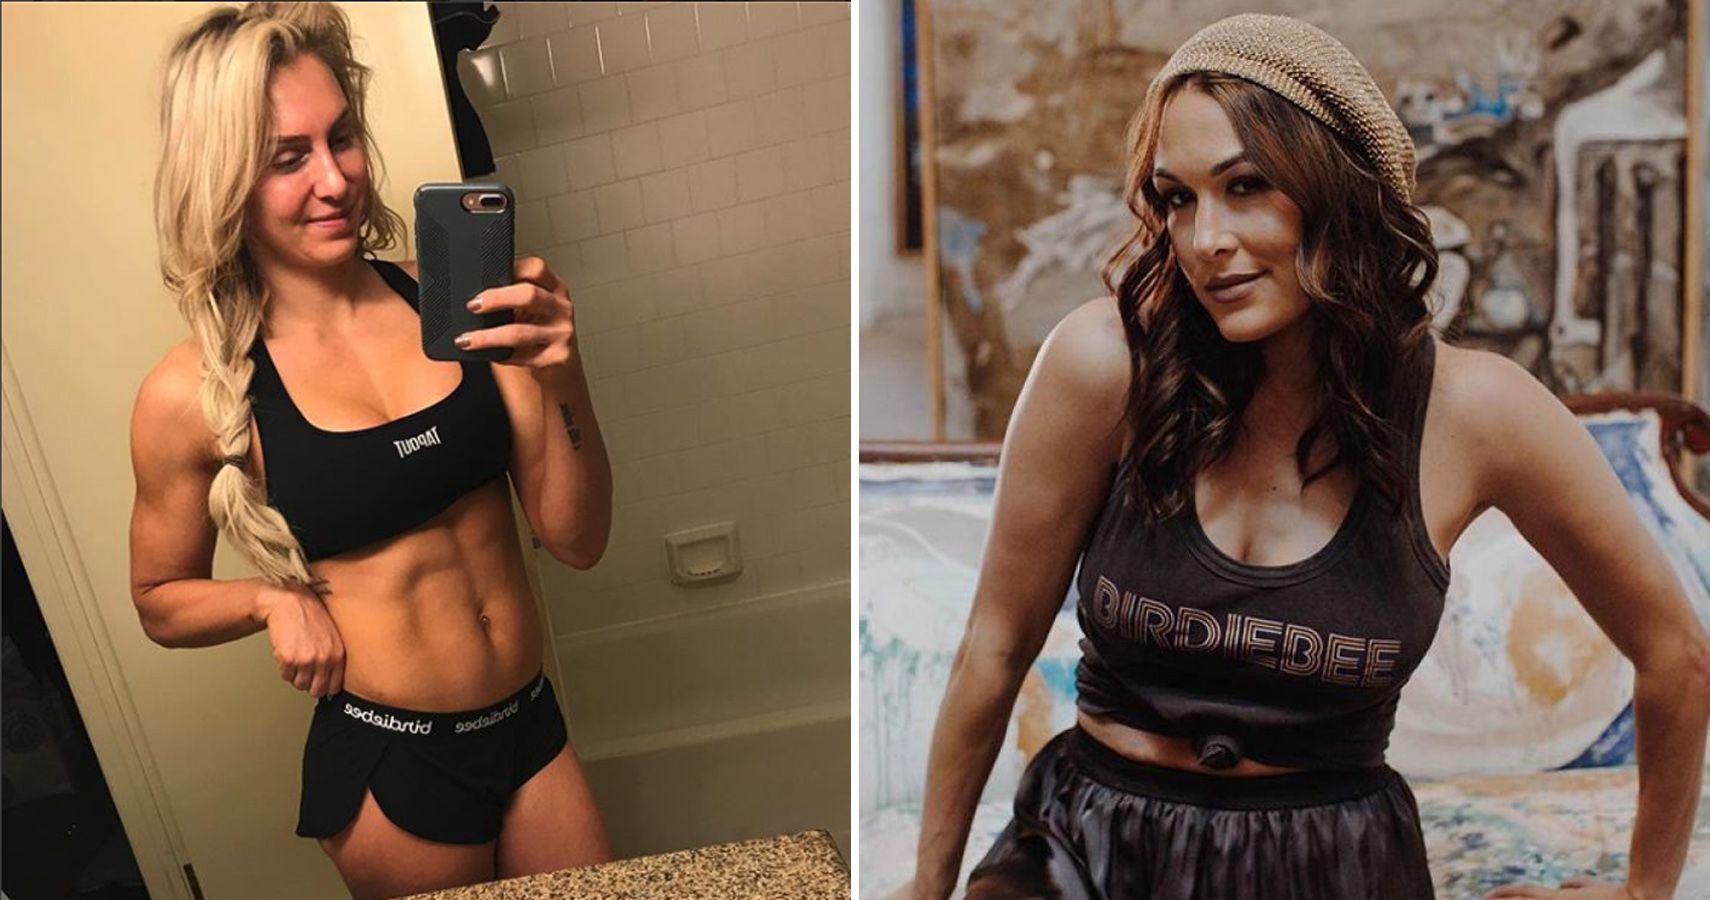 15 Awesome Pictures Of Wrestlers Rocking The Bellas’ Birdiebee Brand